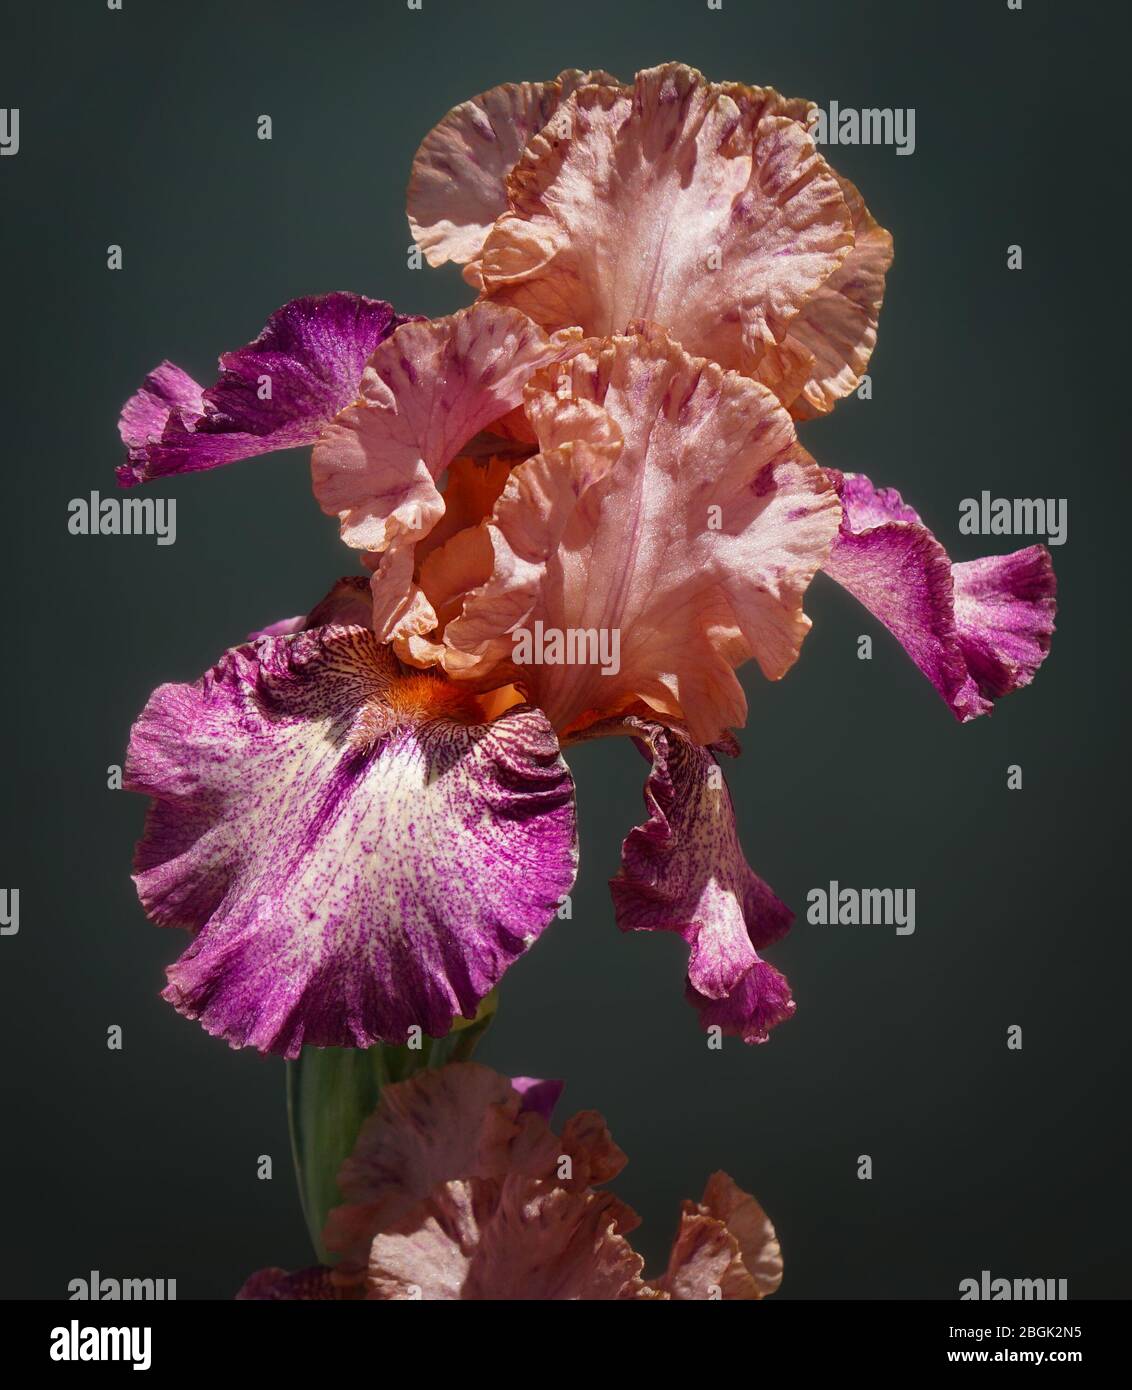 Close up of a beautiful peach and magenta iris flower with its graceful frilly petals. Stock Photo